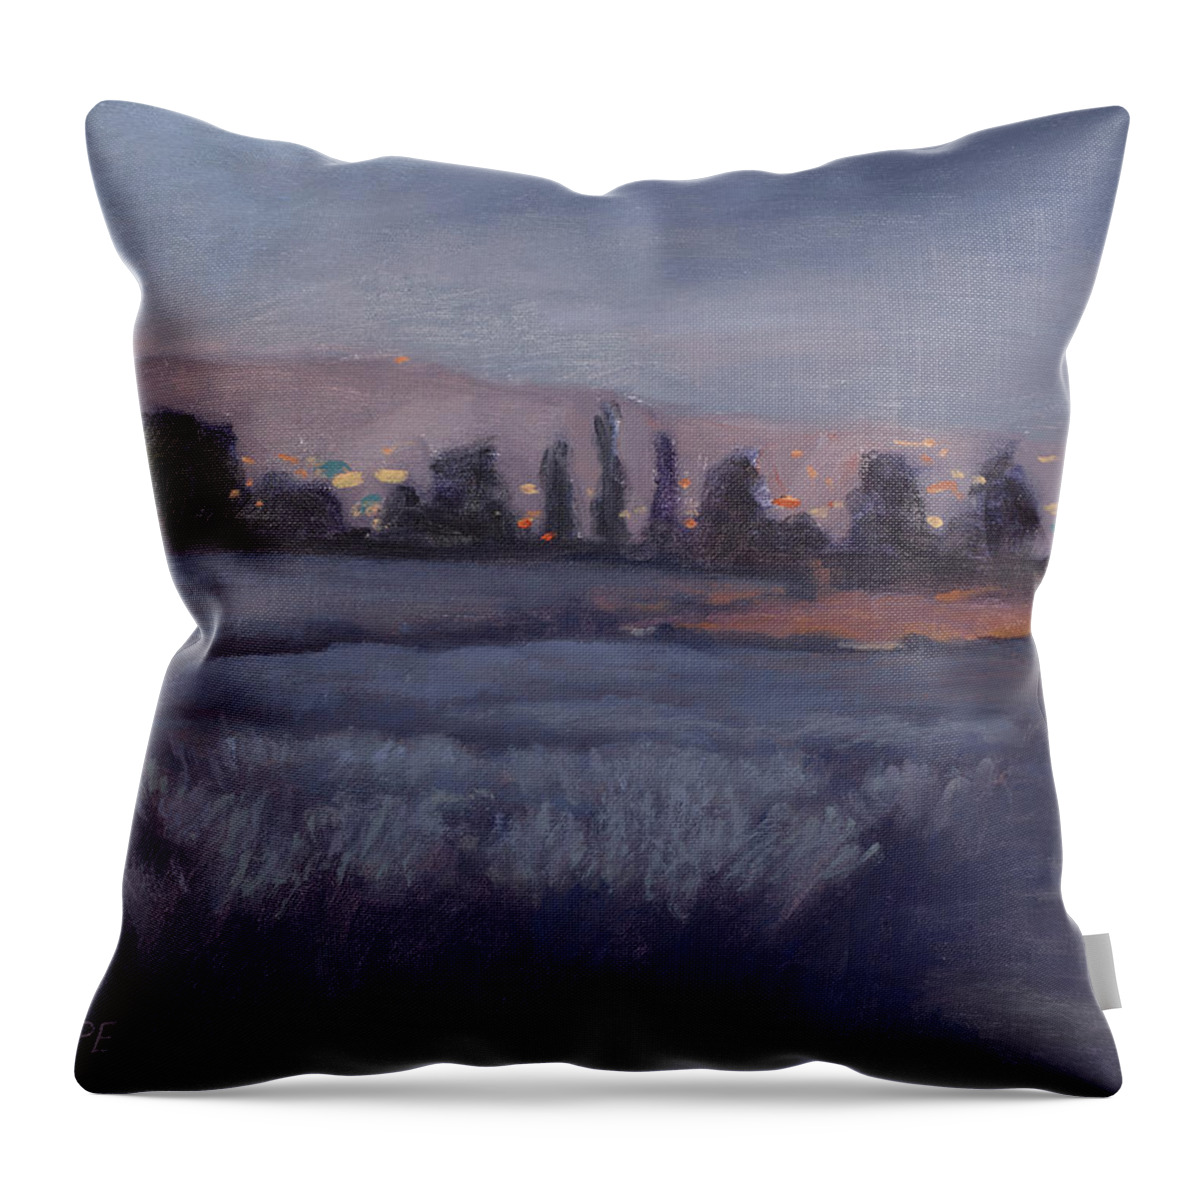 Moonlight Throw Pillow featuring the painting Moonlit Lavender Fields by Jane Thorpe